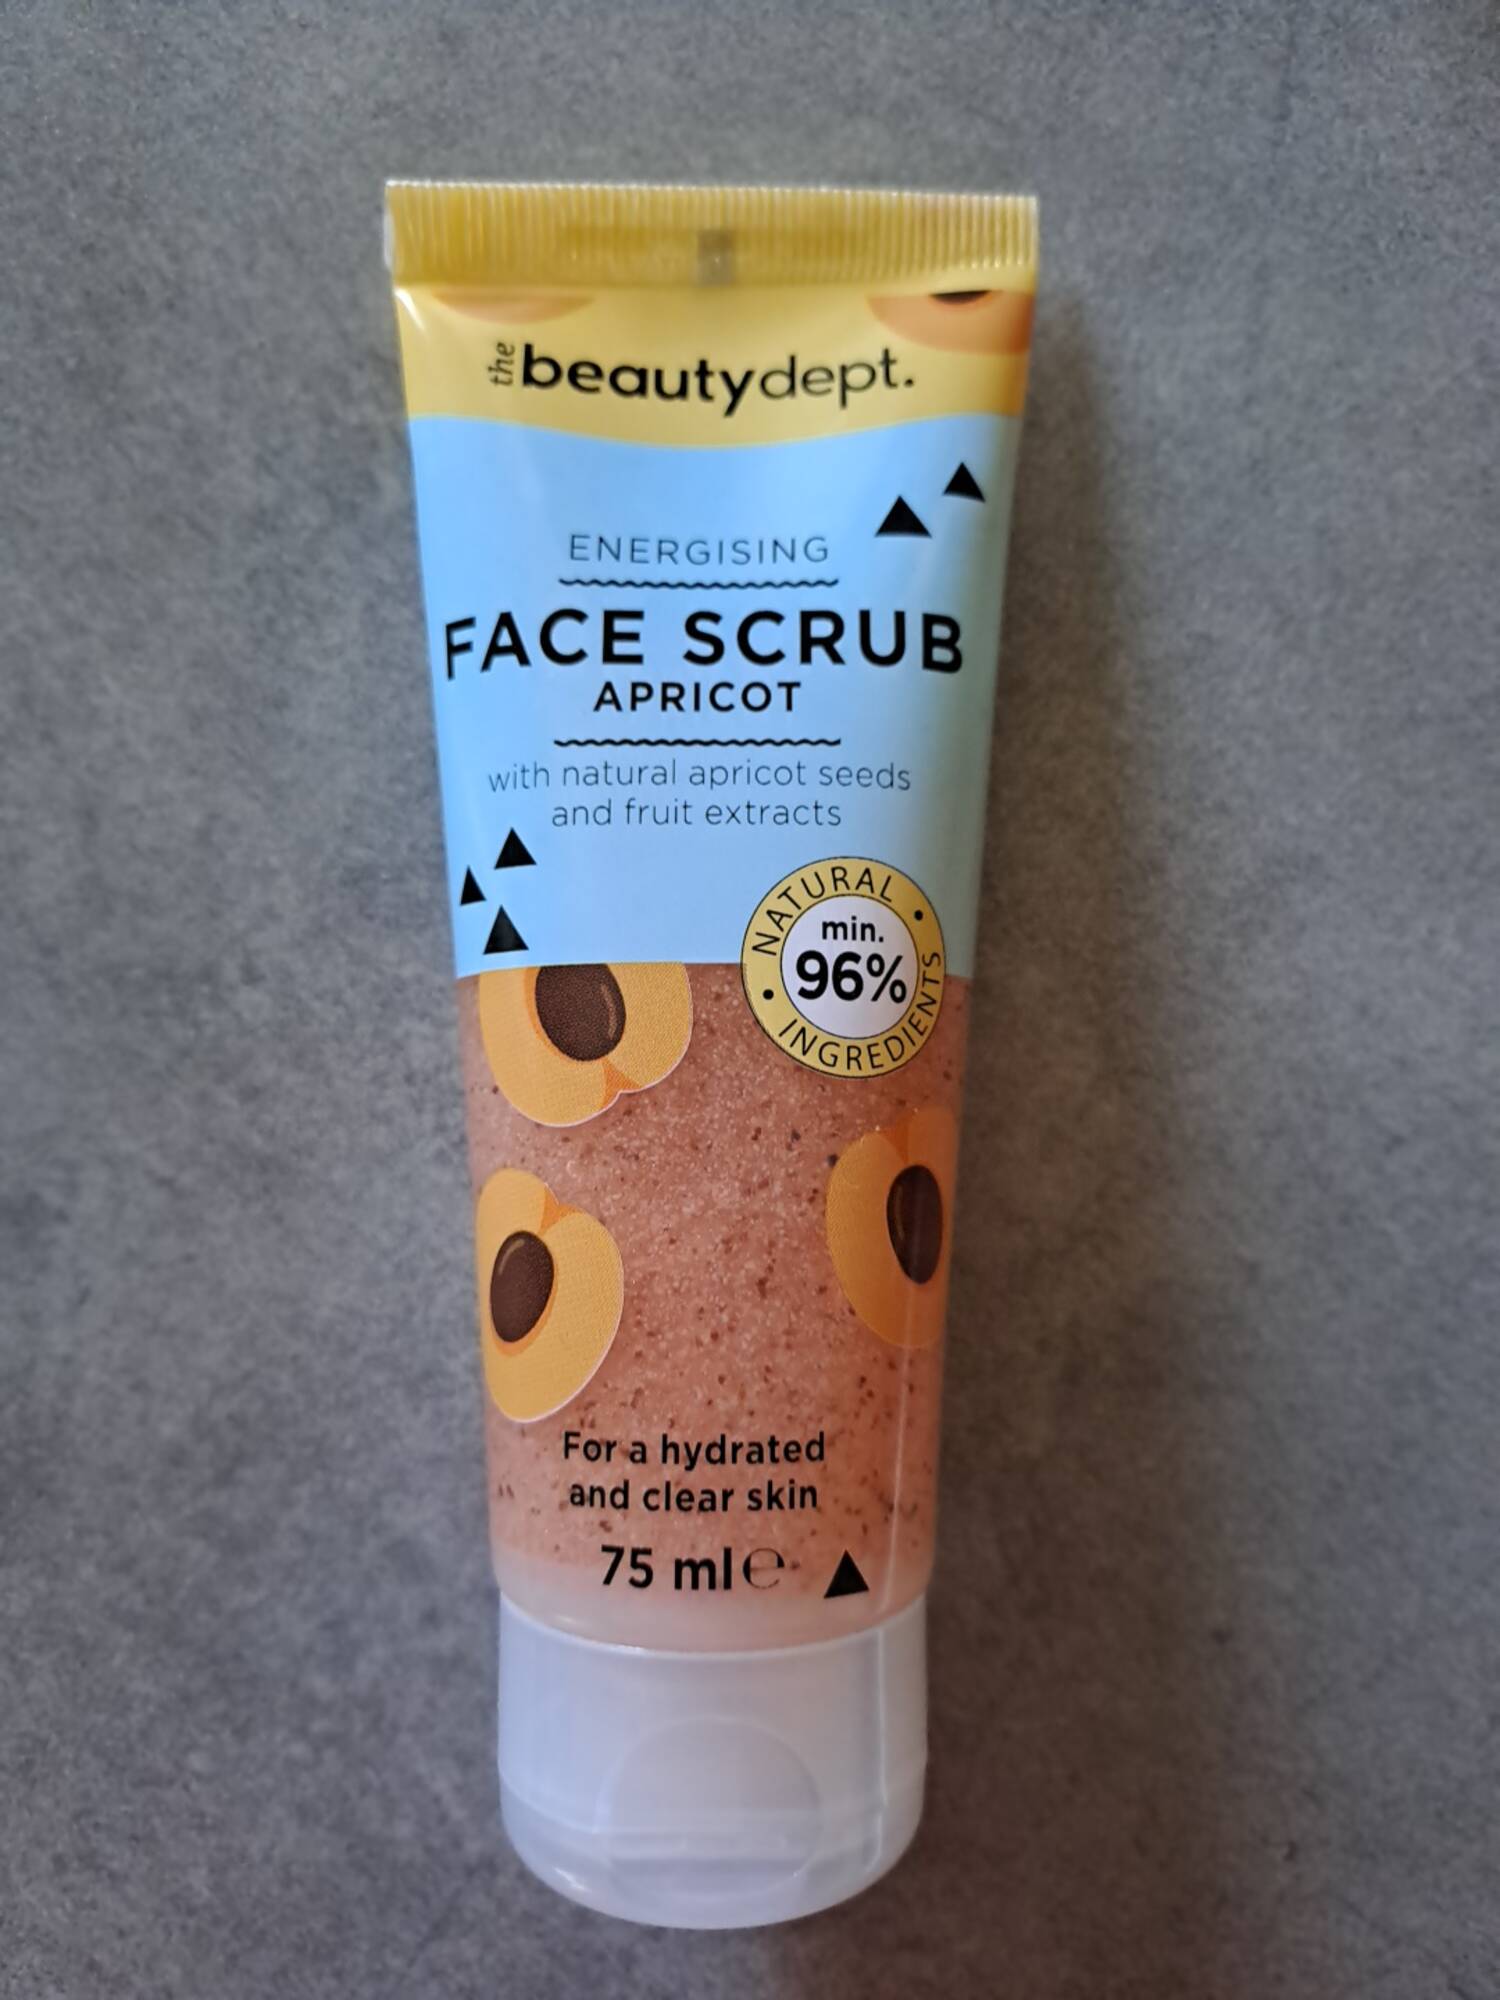 THE BEAUTY DEPT - Energising - Face scrub apricot